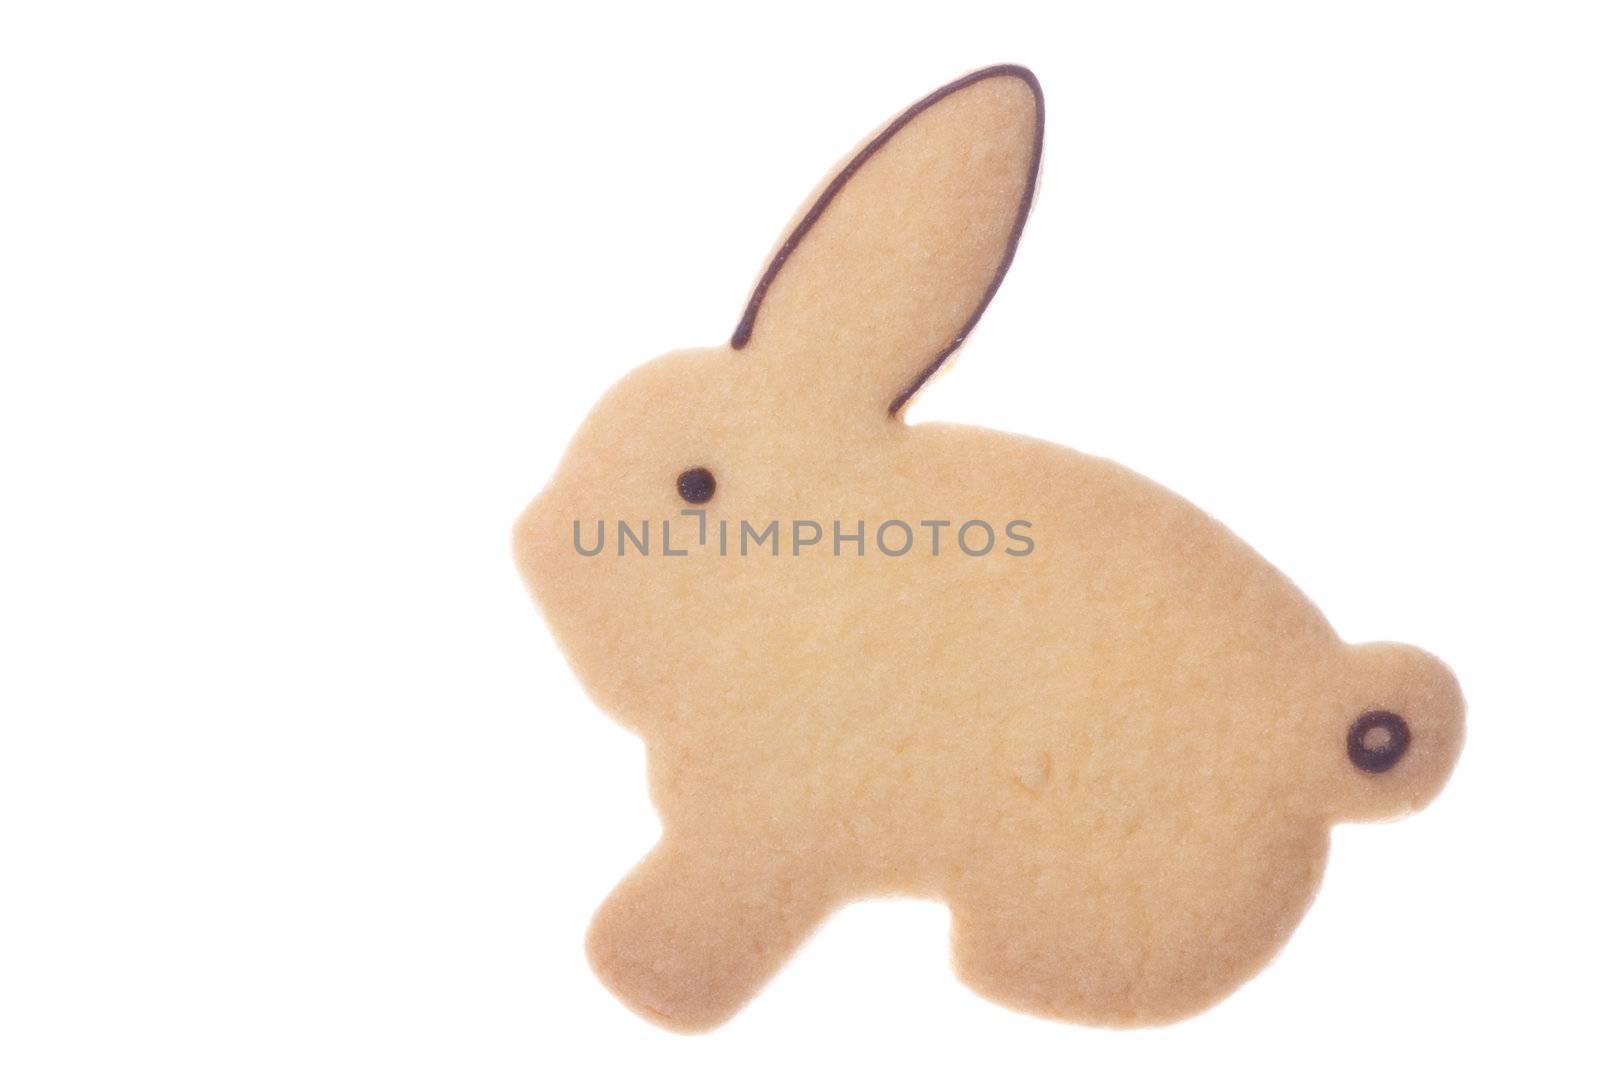 Isolated image of a rabbit shaped biscuit.